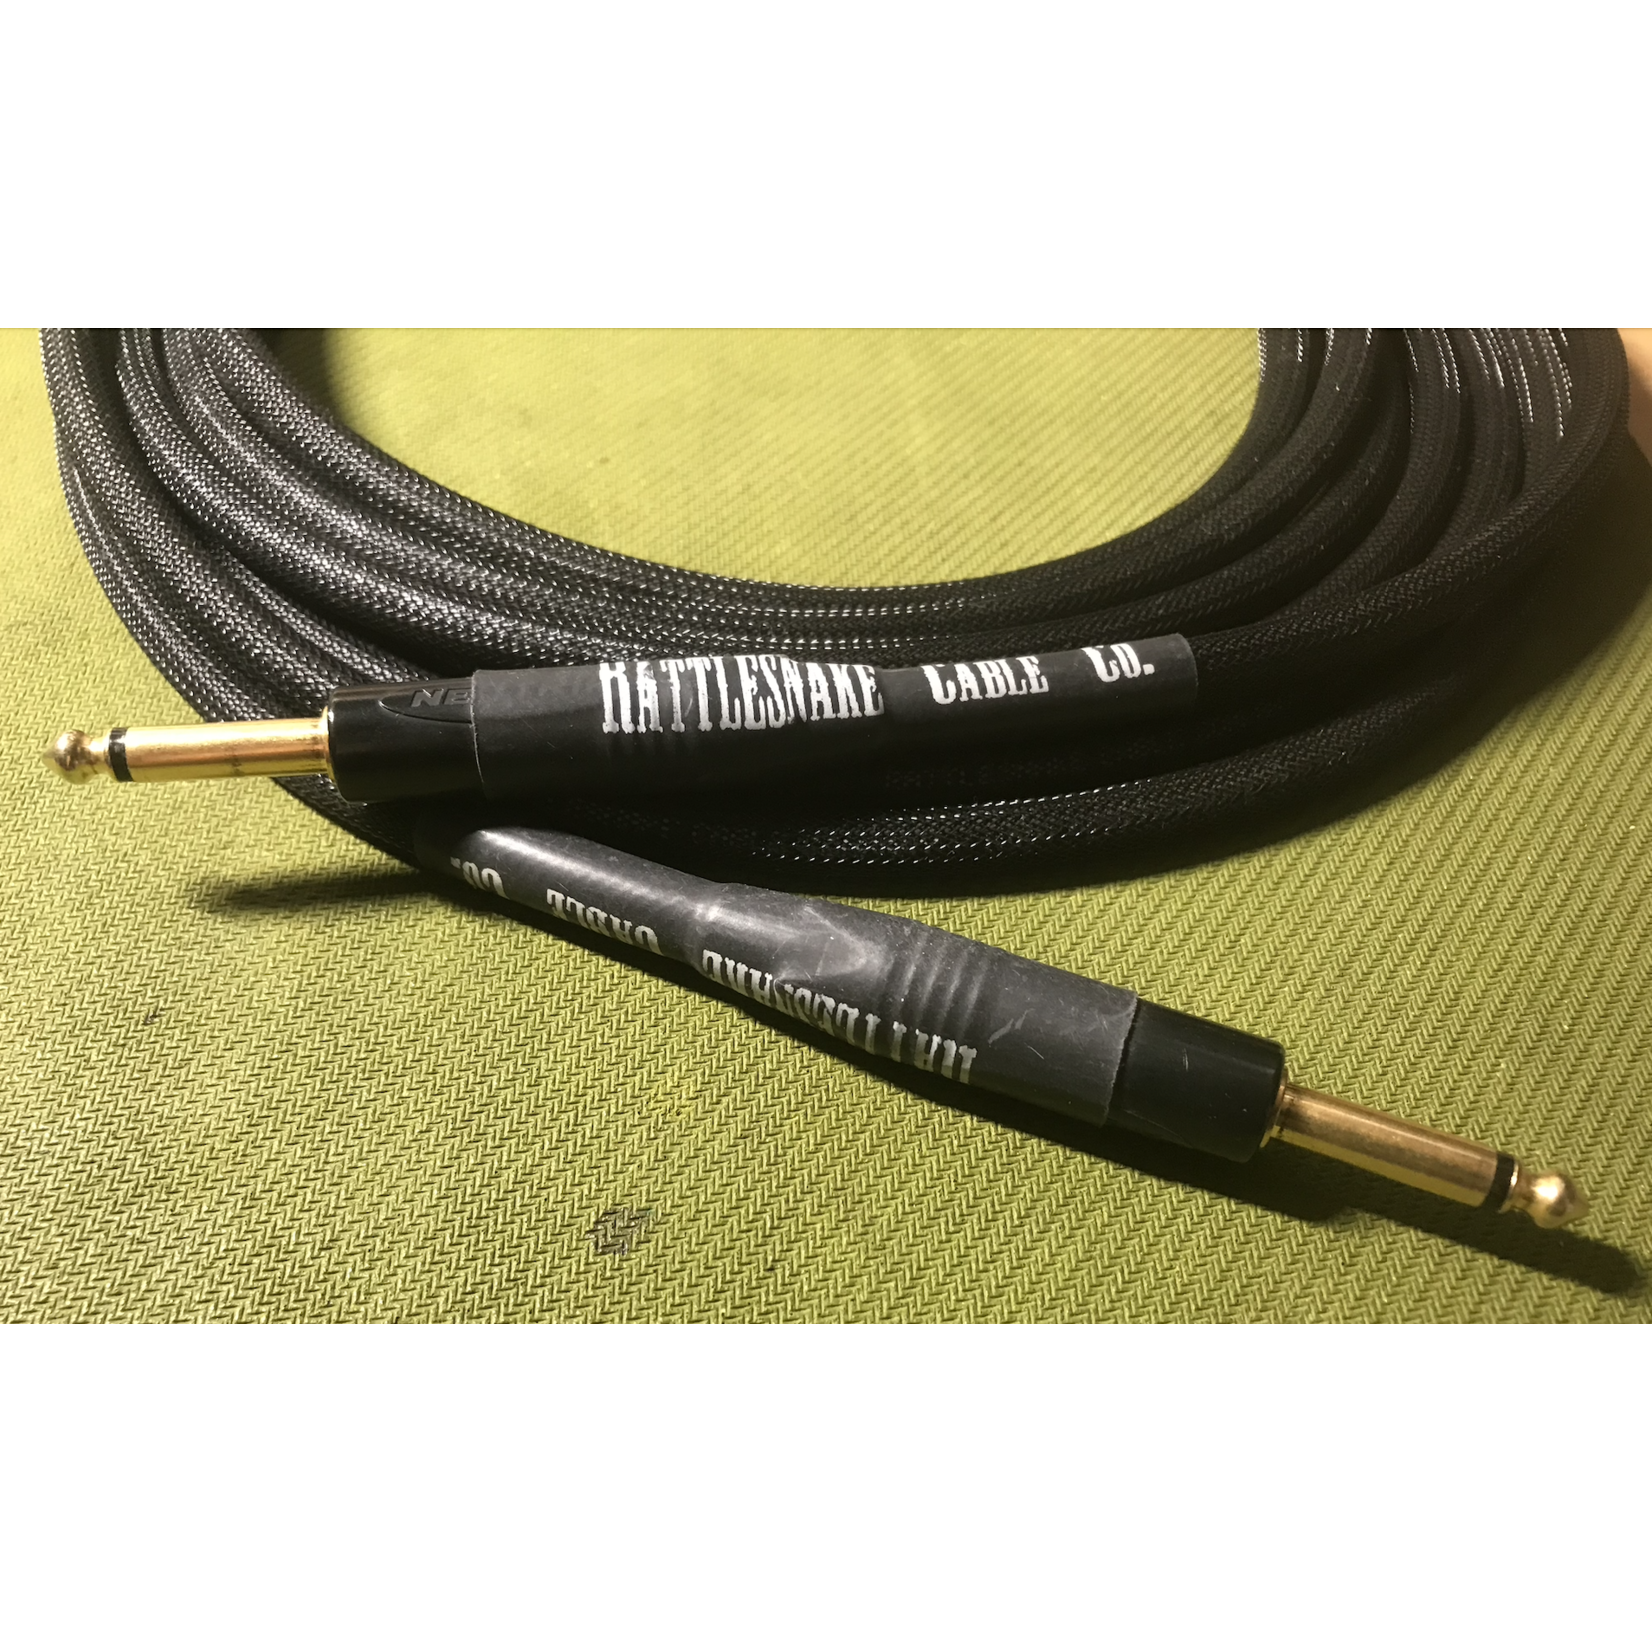 Rattlesnake Cable Co USED Rattlesnake Cable Co Guitar/Instrument Cable Approximately 15 foot long Straight-Straight ($20 cost if bought at our GGG Physical Store Location)